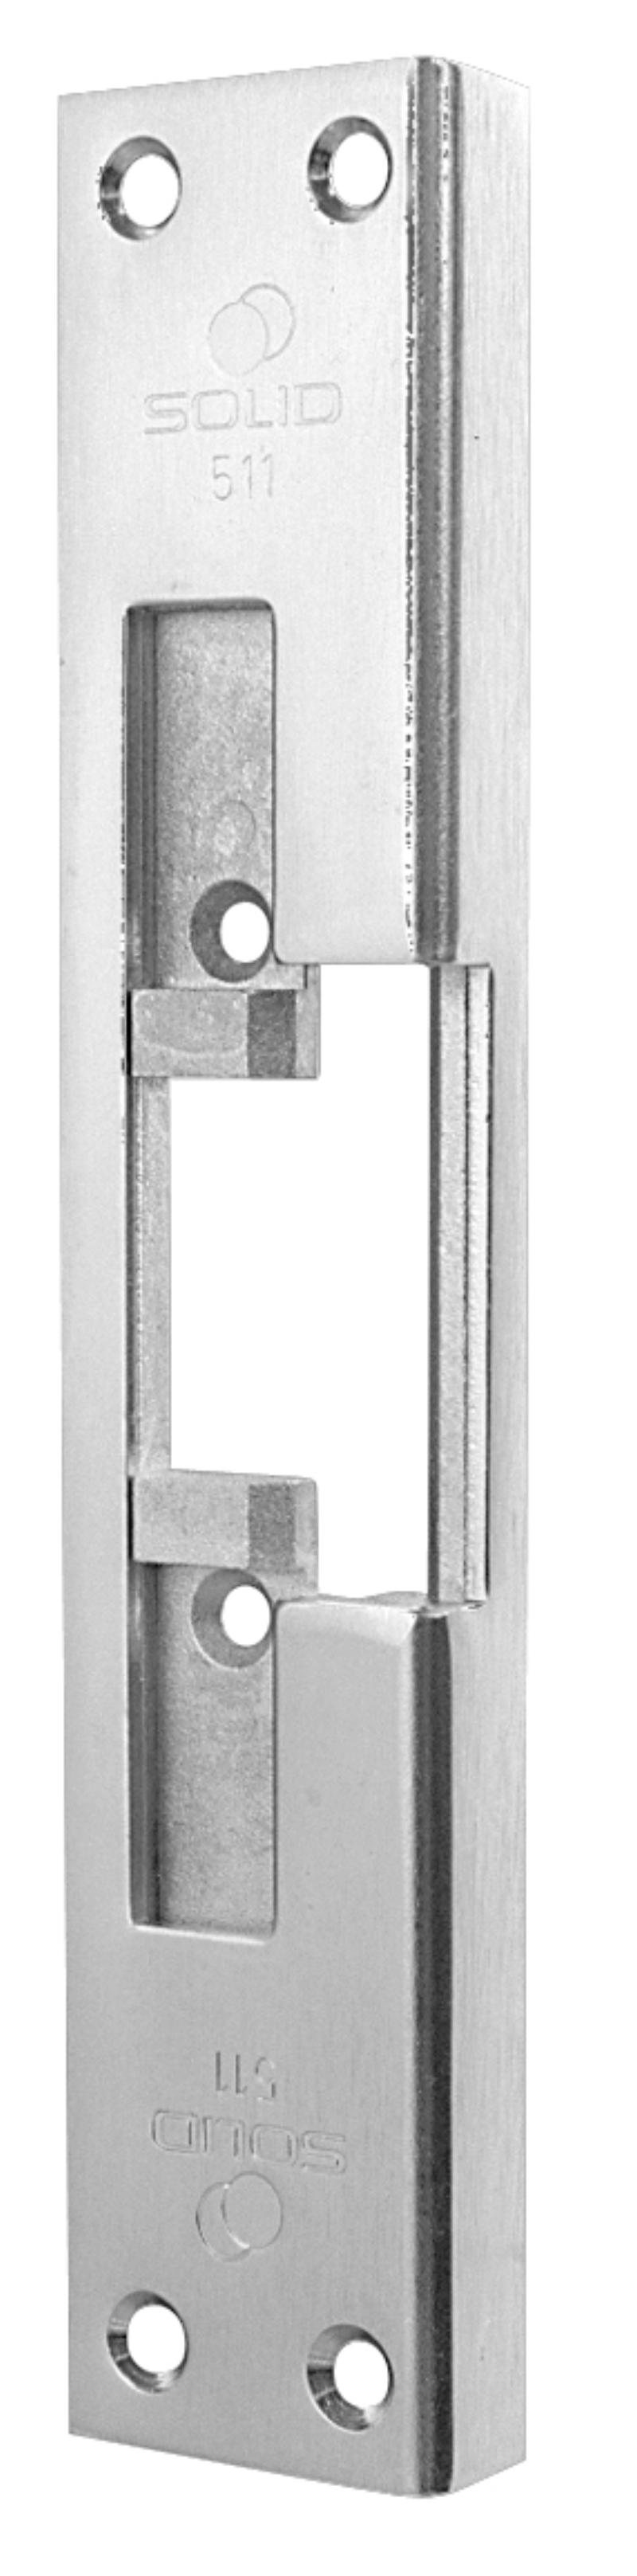 Solid post 511 t/electric end plate (971237)